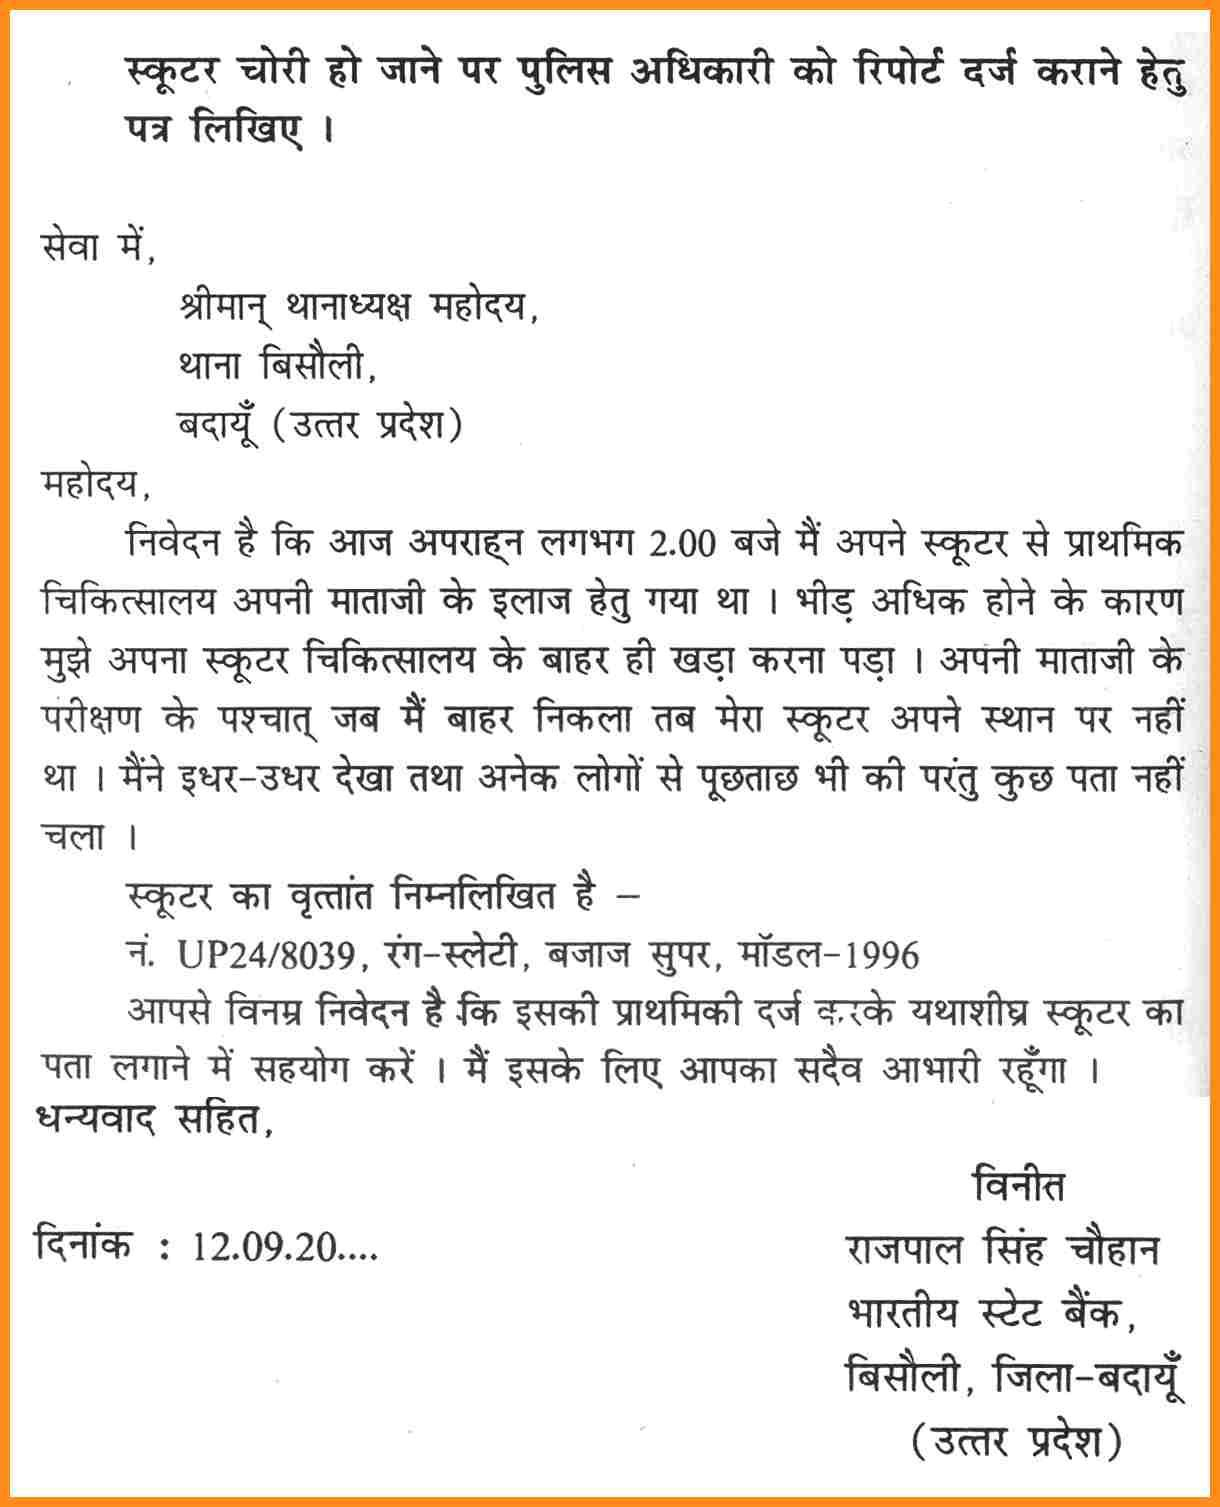 bank-statement-letter-format-in-hindi-imagesee